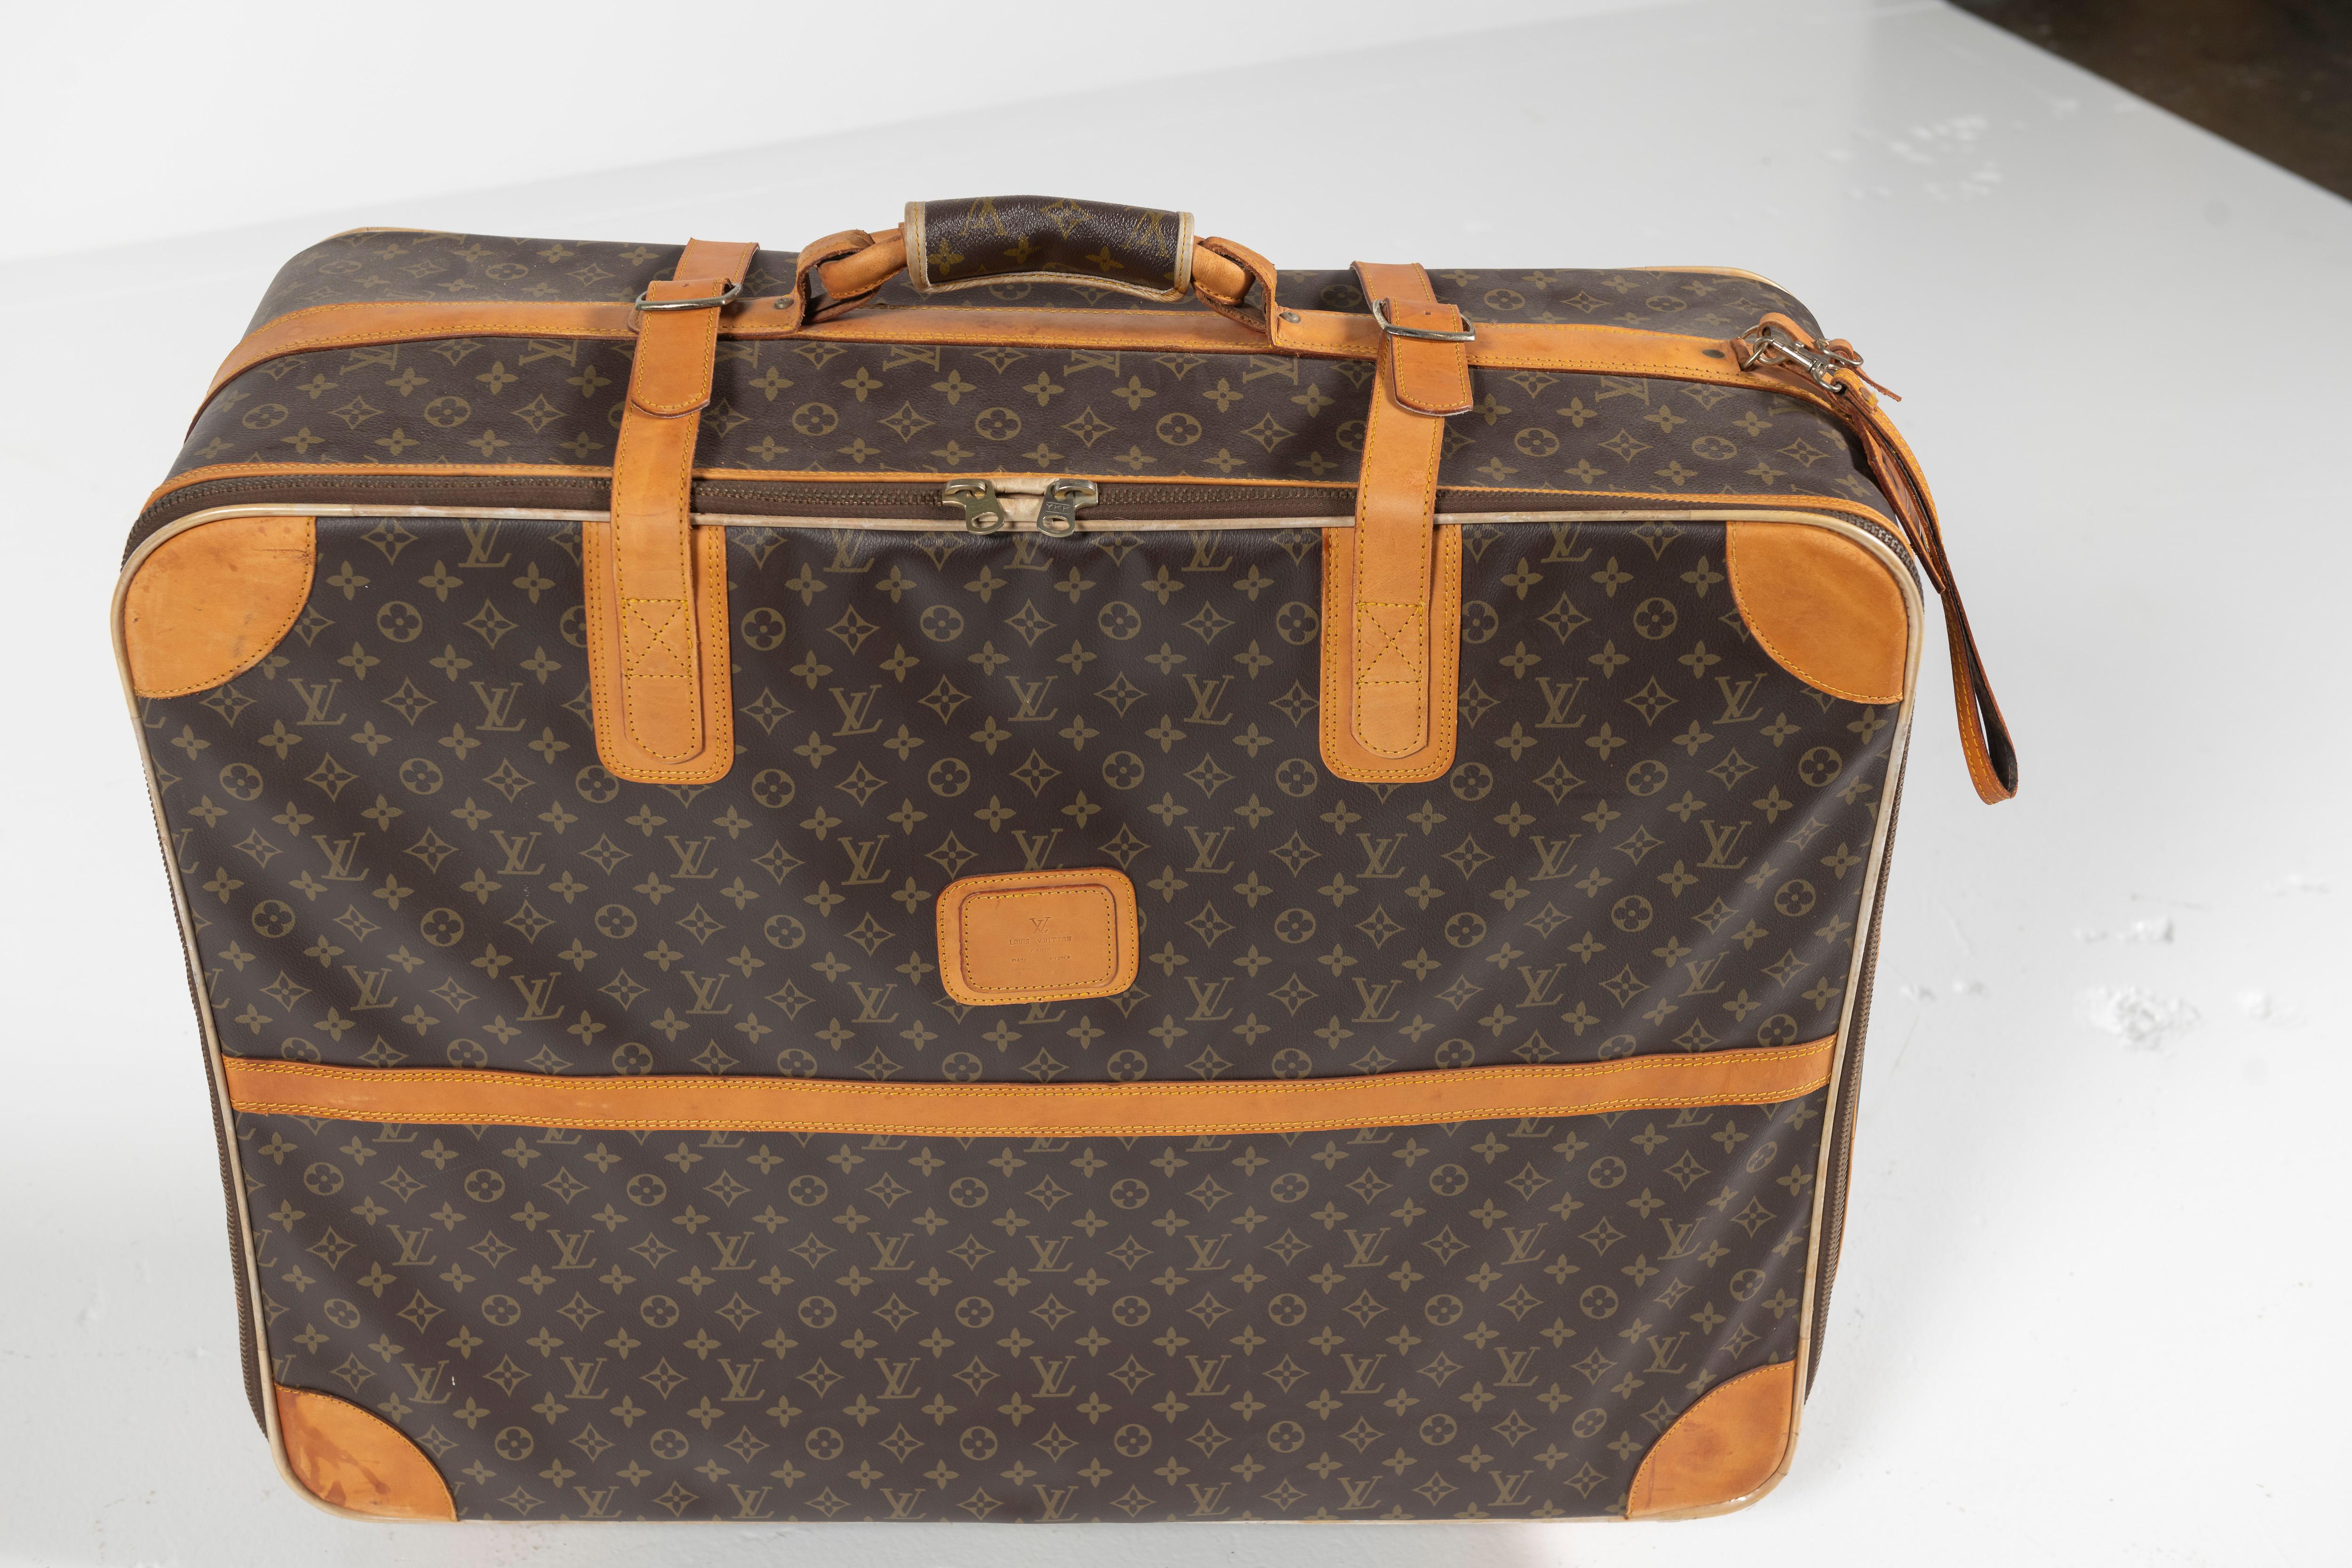 Brass Vintage Louis Vuitton Suitcase, Monogrammed Coated Canvas, Large-Sized For Sale